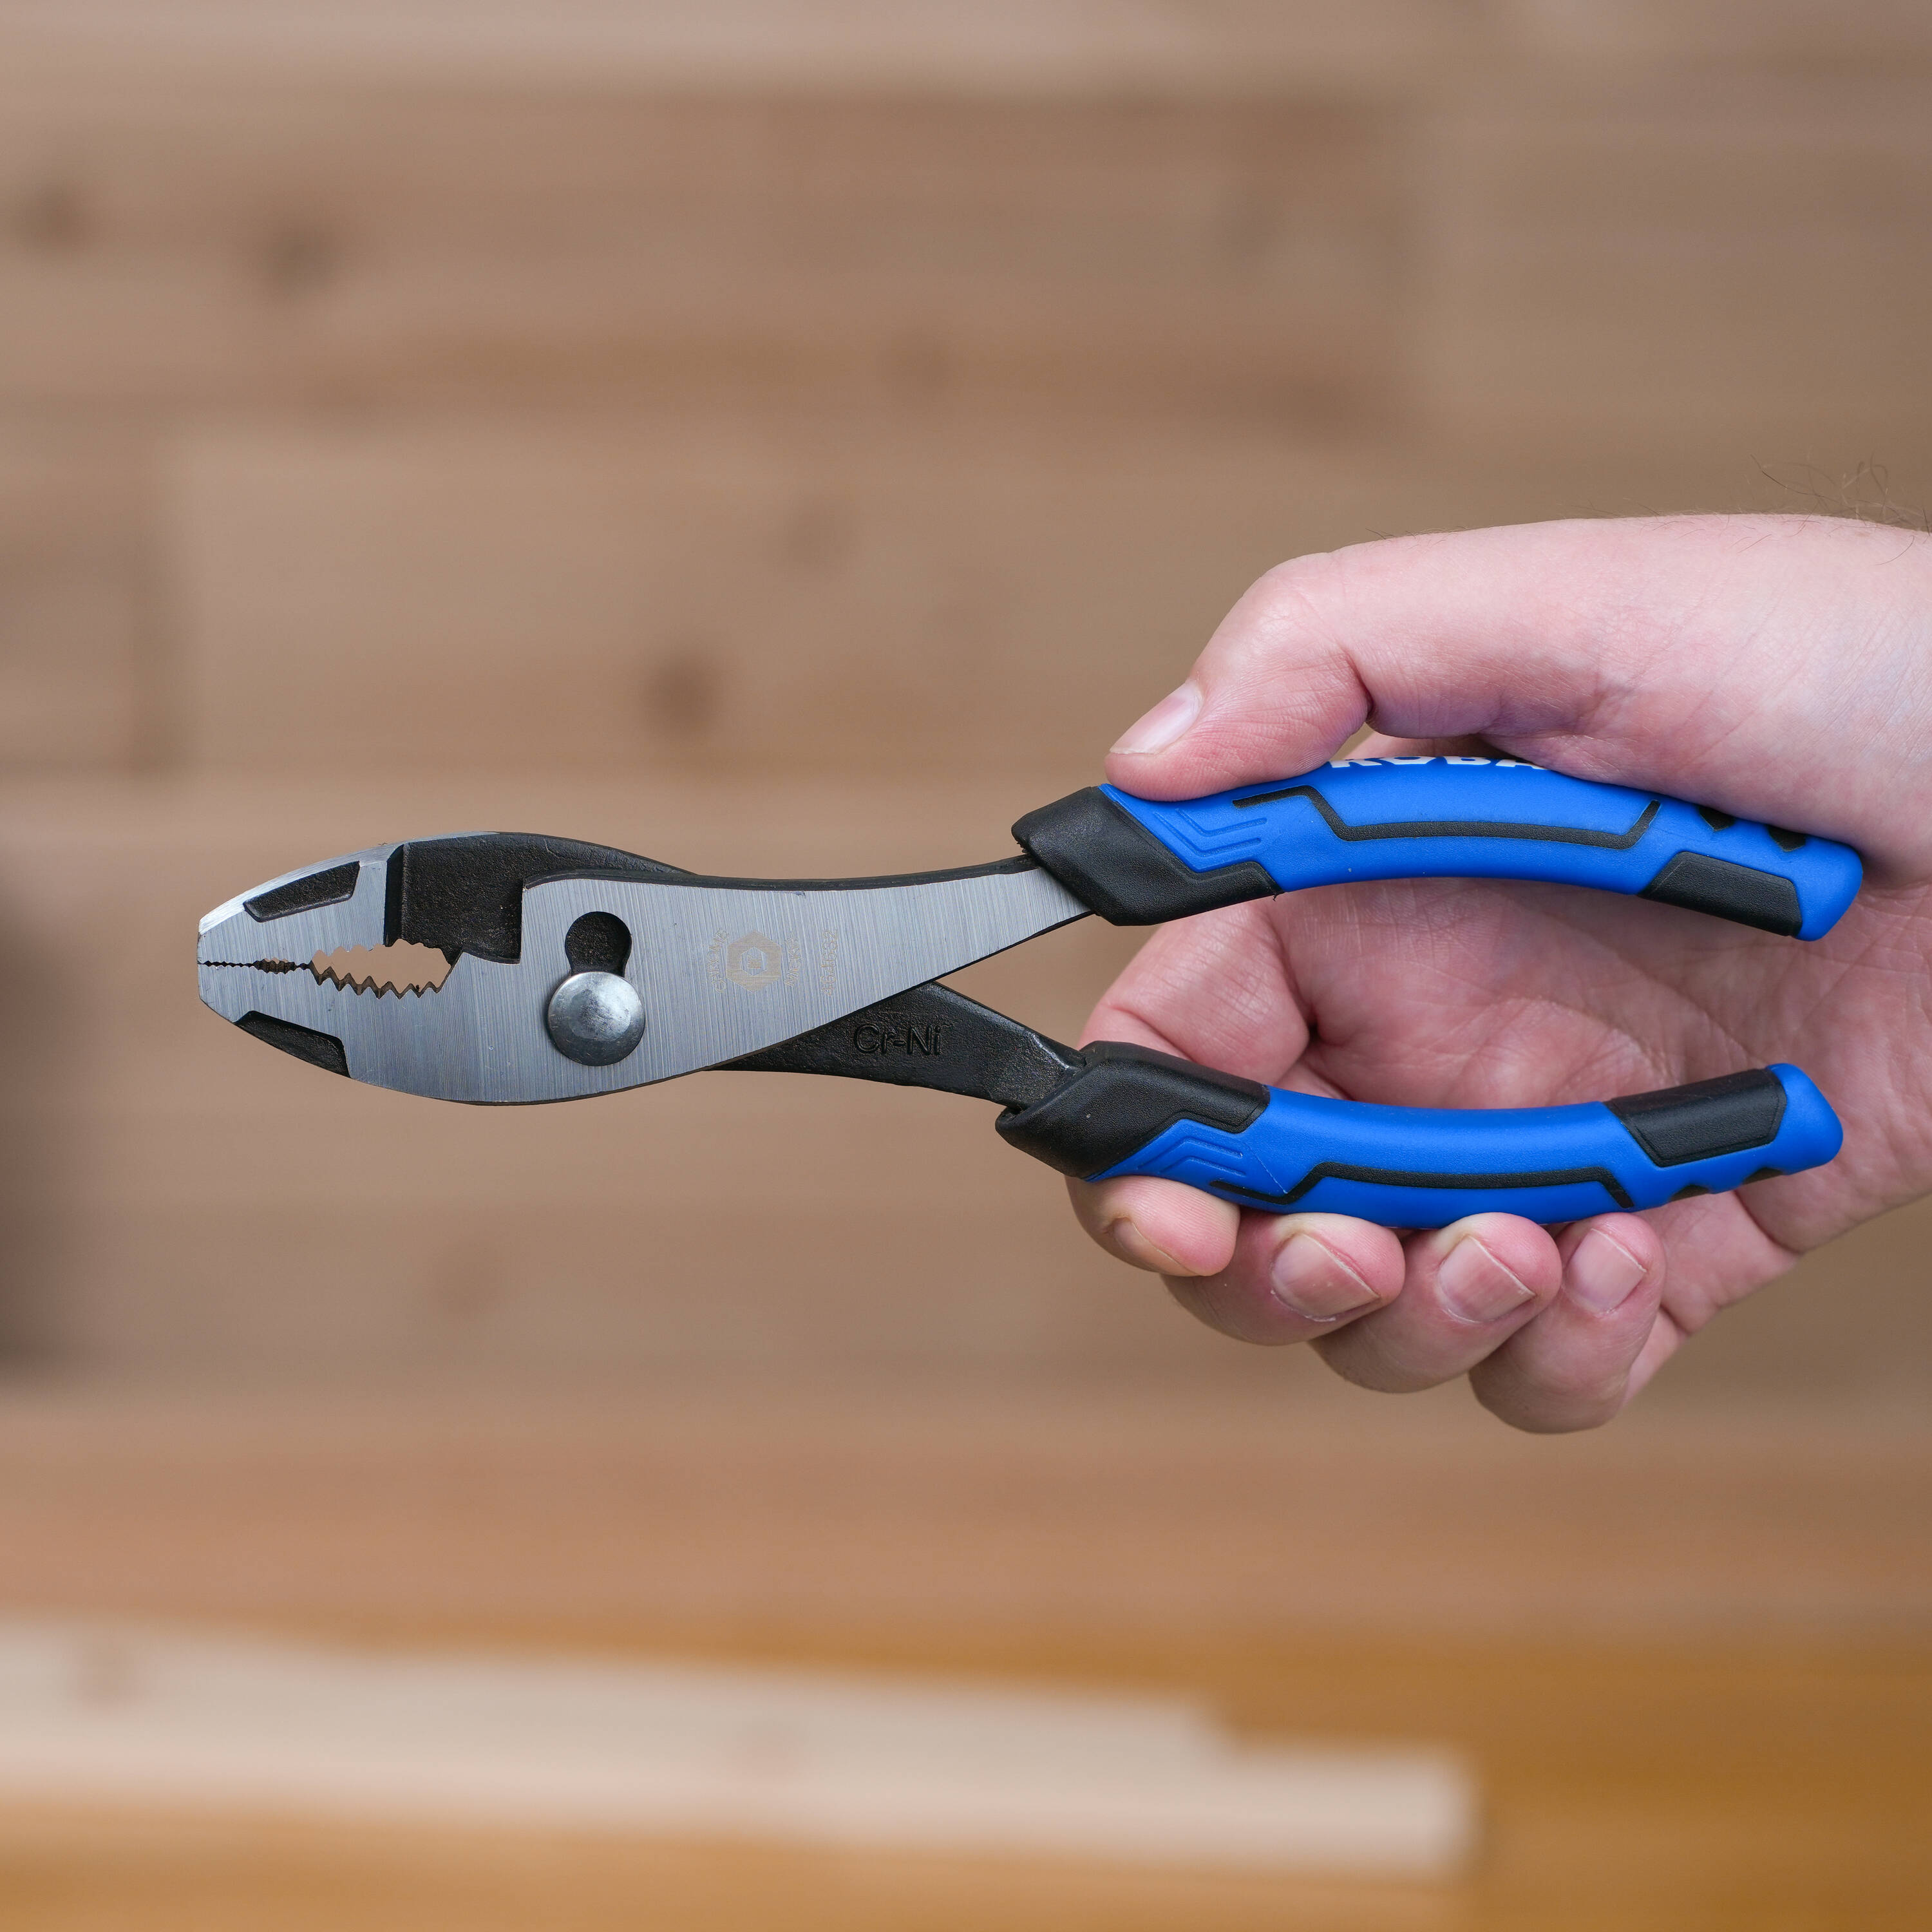 Kobalt 8-in Home Repair Slip Joint Pliers with Wire Cutter